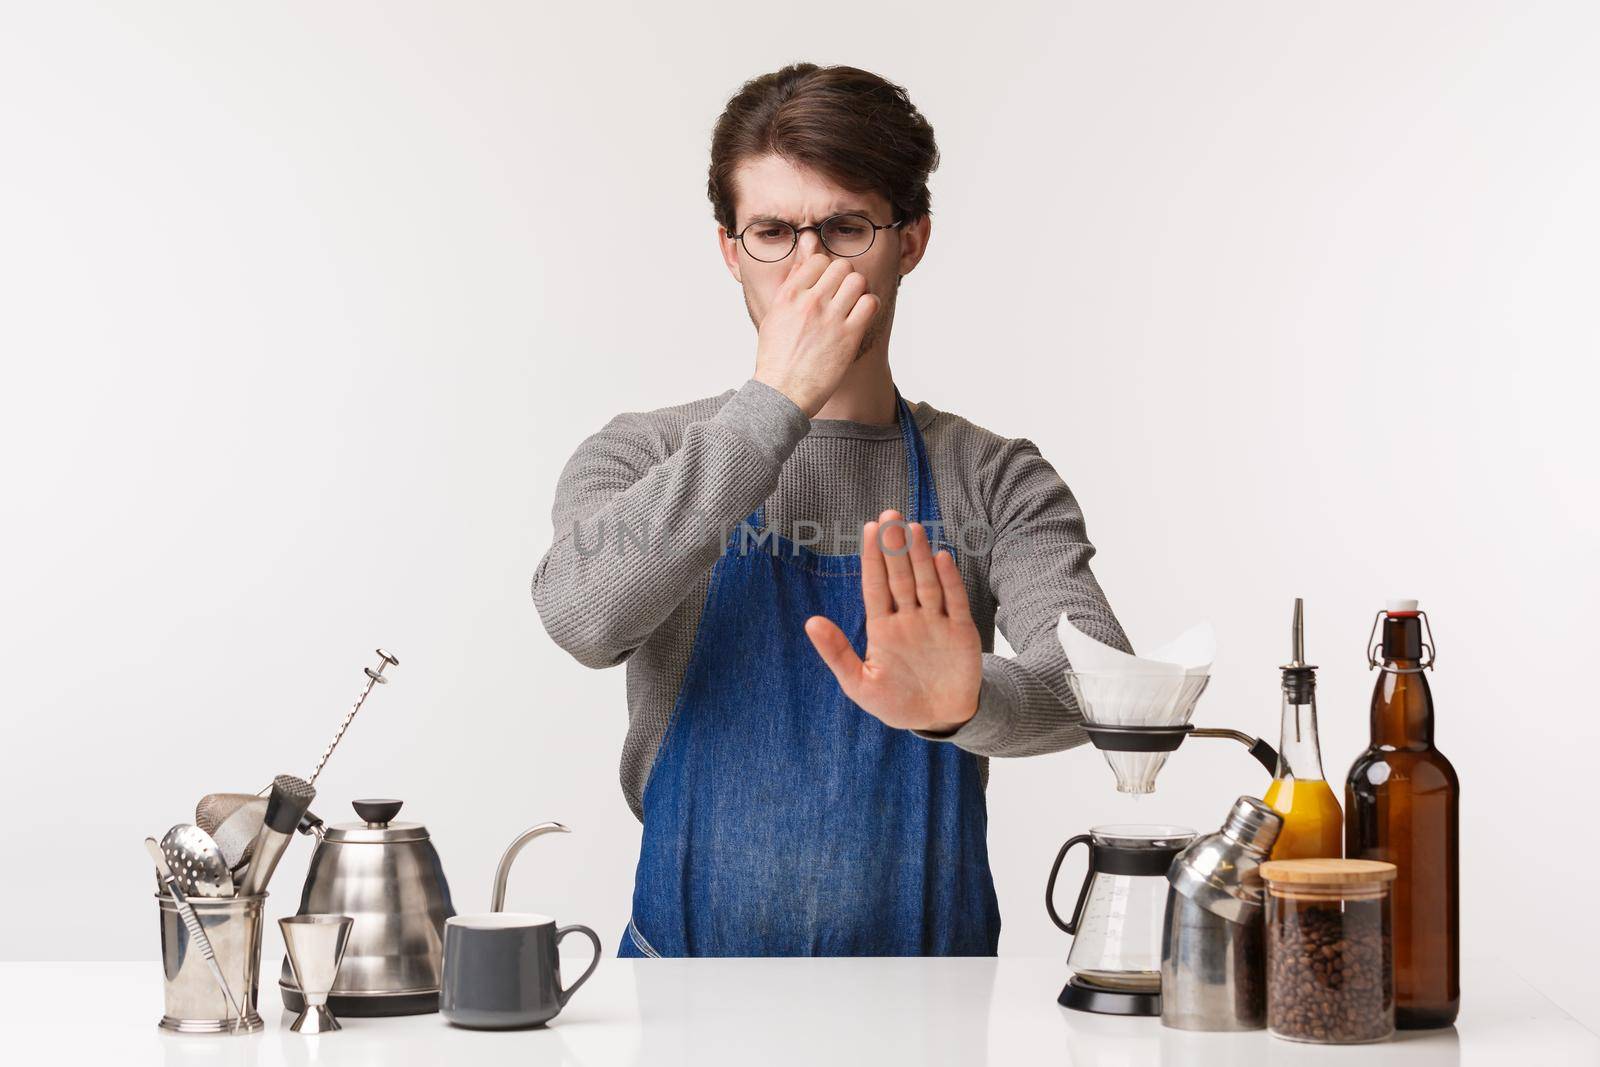 Barista, cafe worker and bartender concept. Portrait of displeased and reluctant young male in apron, standing near bar counter with goods, coffee hear nasy awful smell, show stop sign.